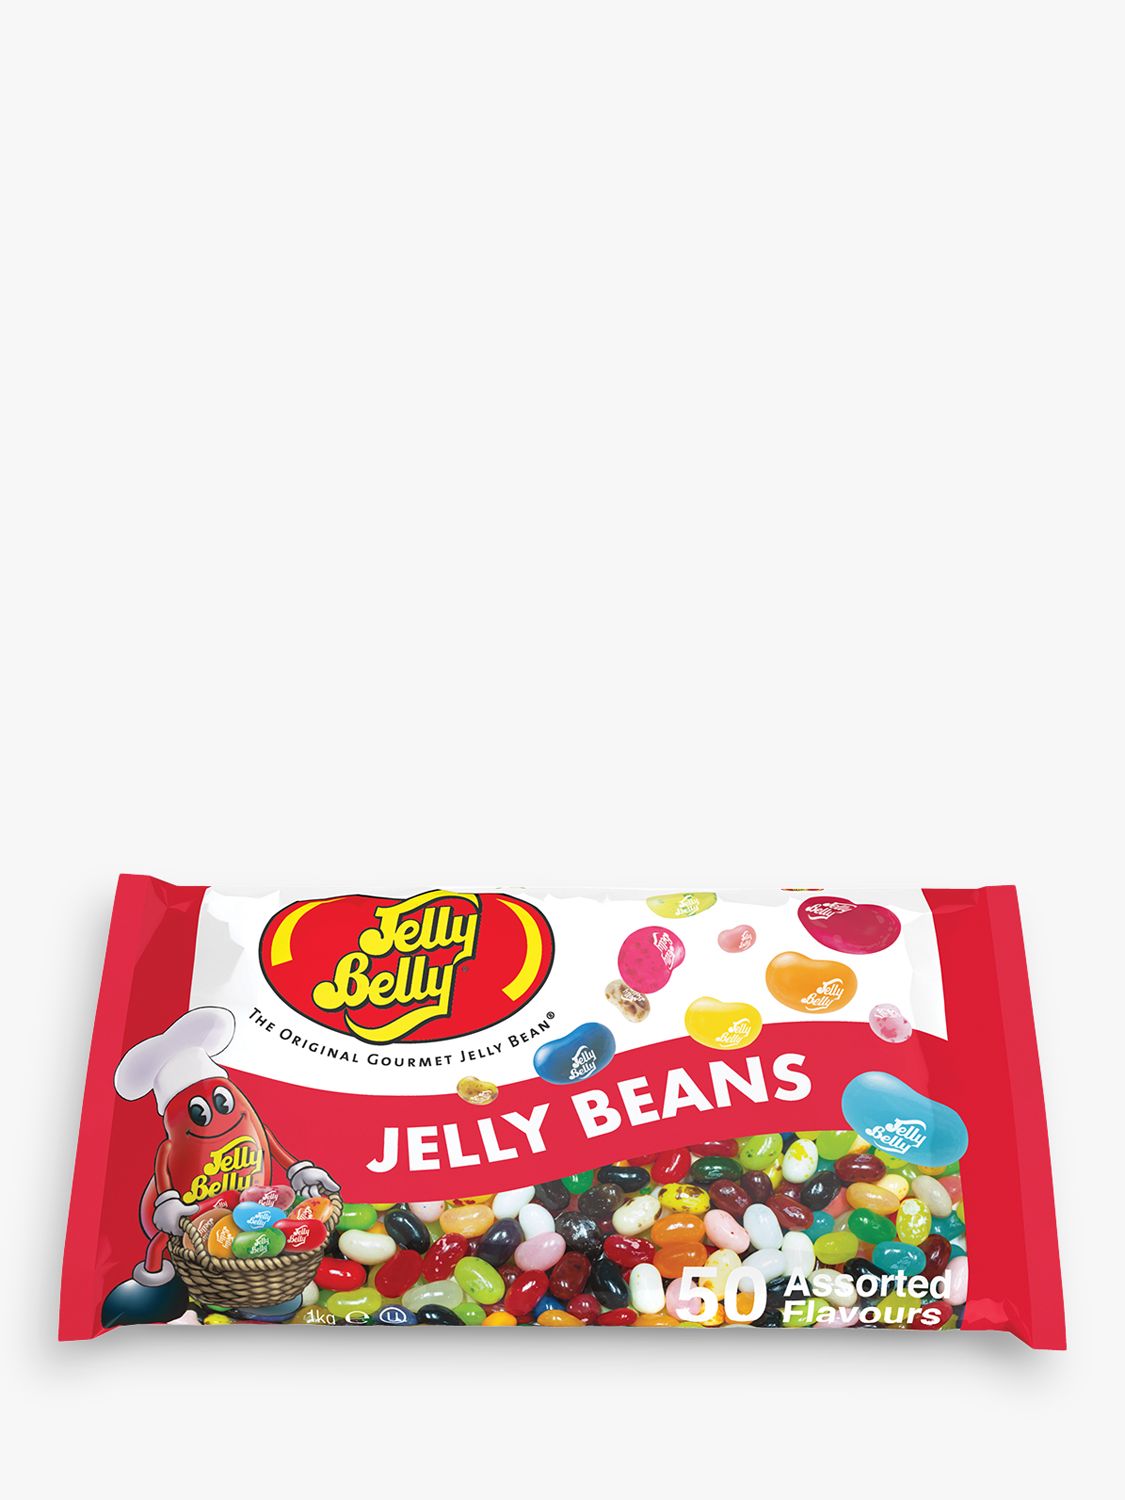 Jelly　Belly　Bag　Assorted　50　Flavours　Beans,　of　Jelly　1kg